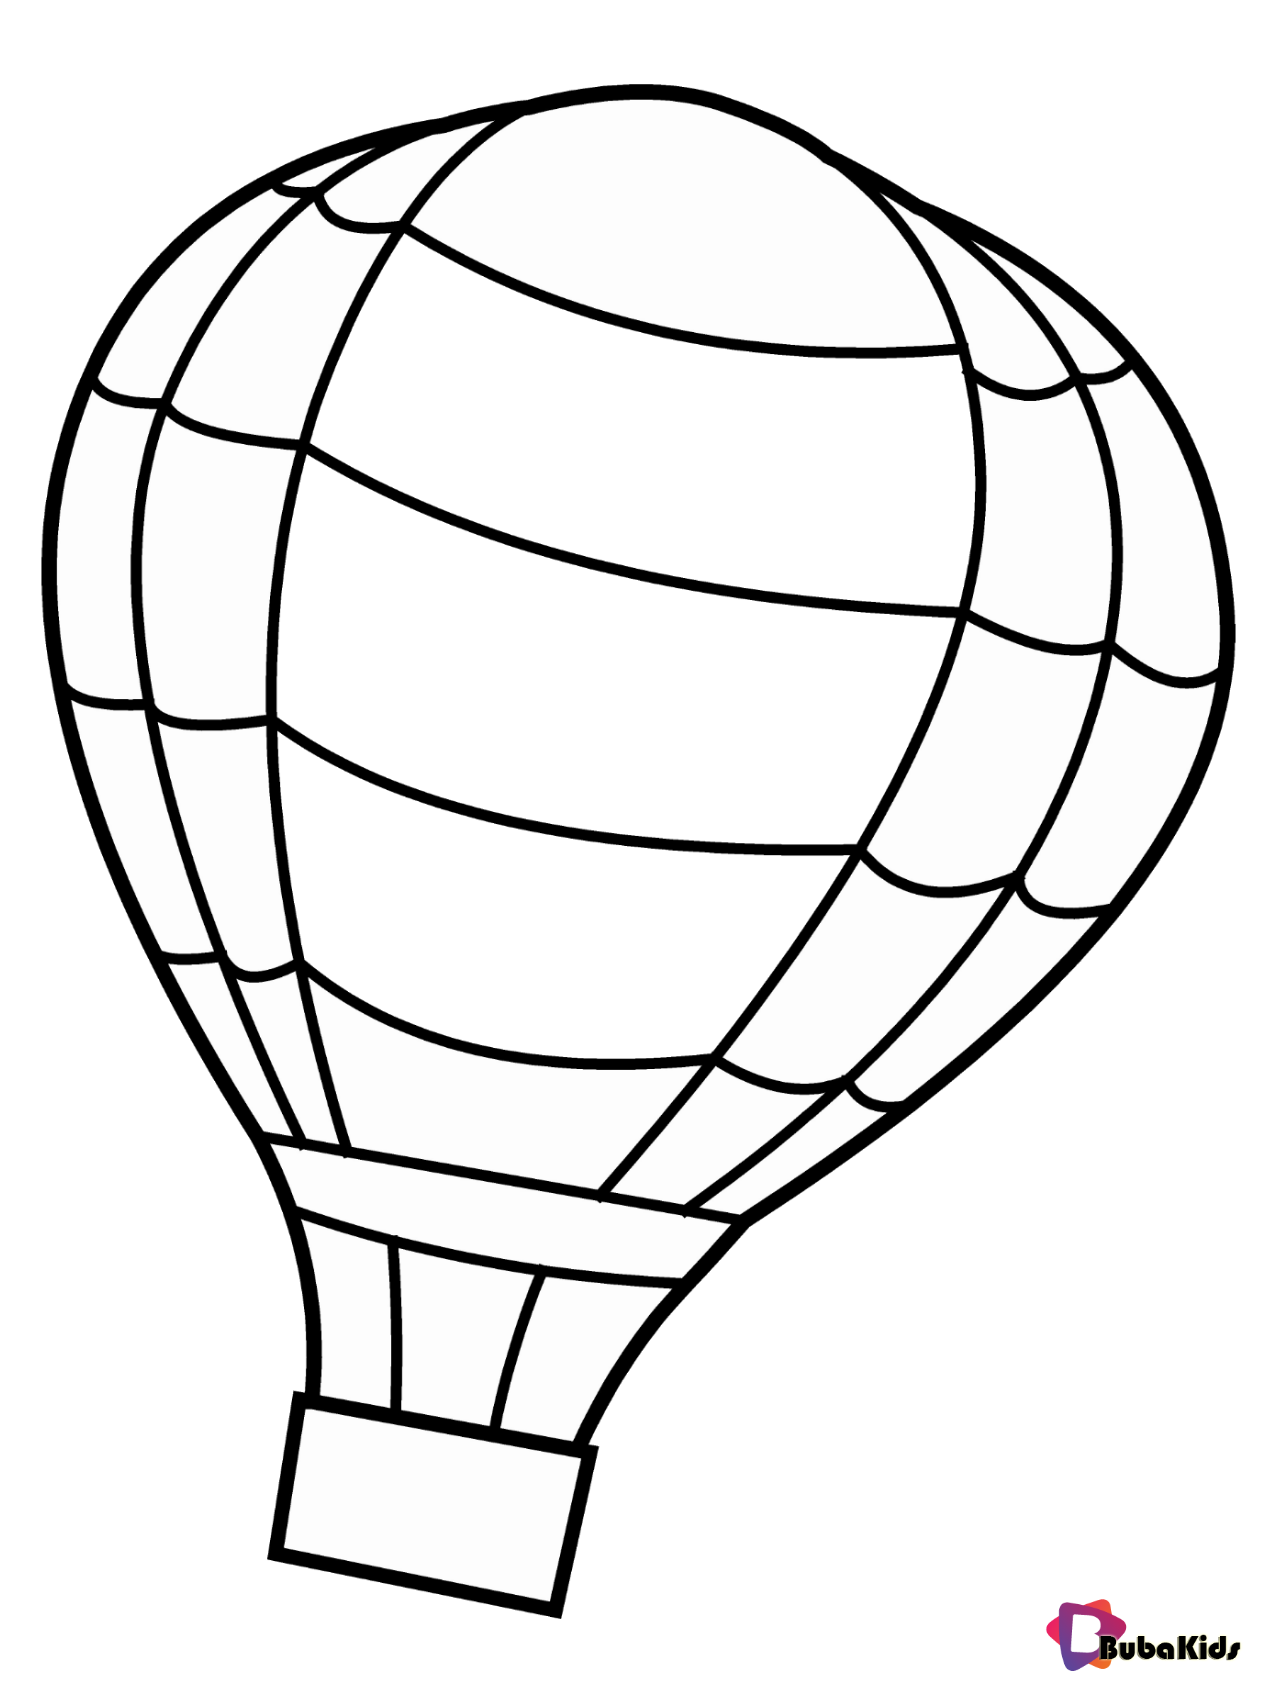 Free Hot air balloon coloring page for kids Wallpaper